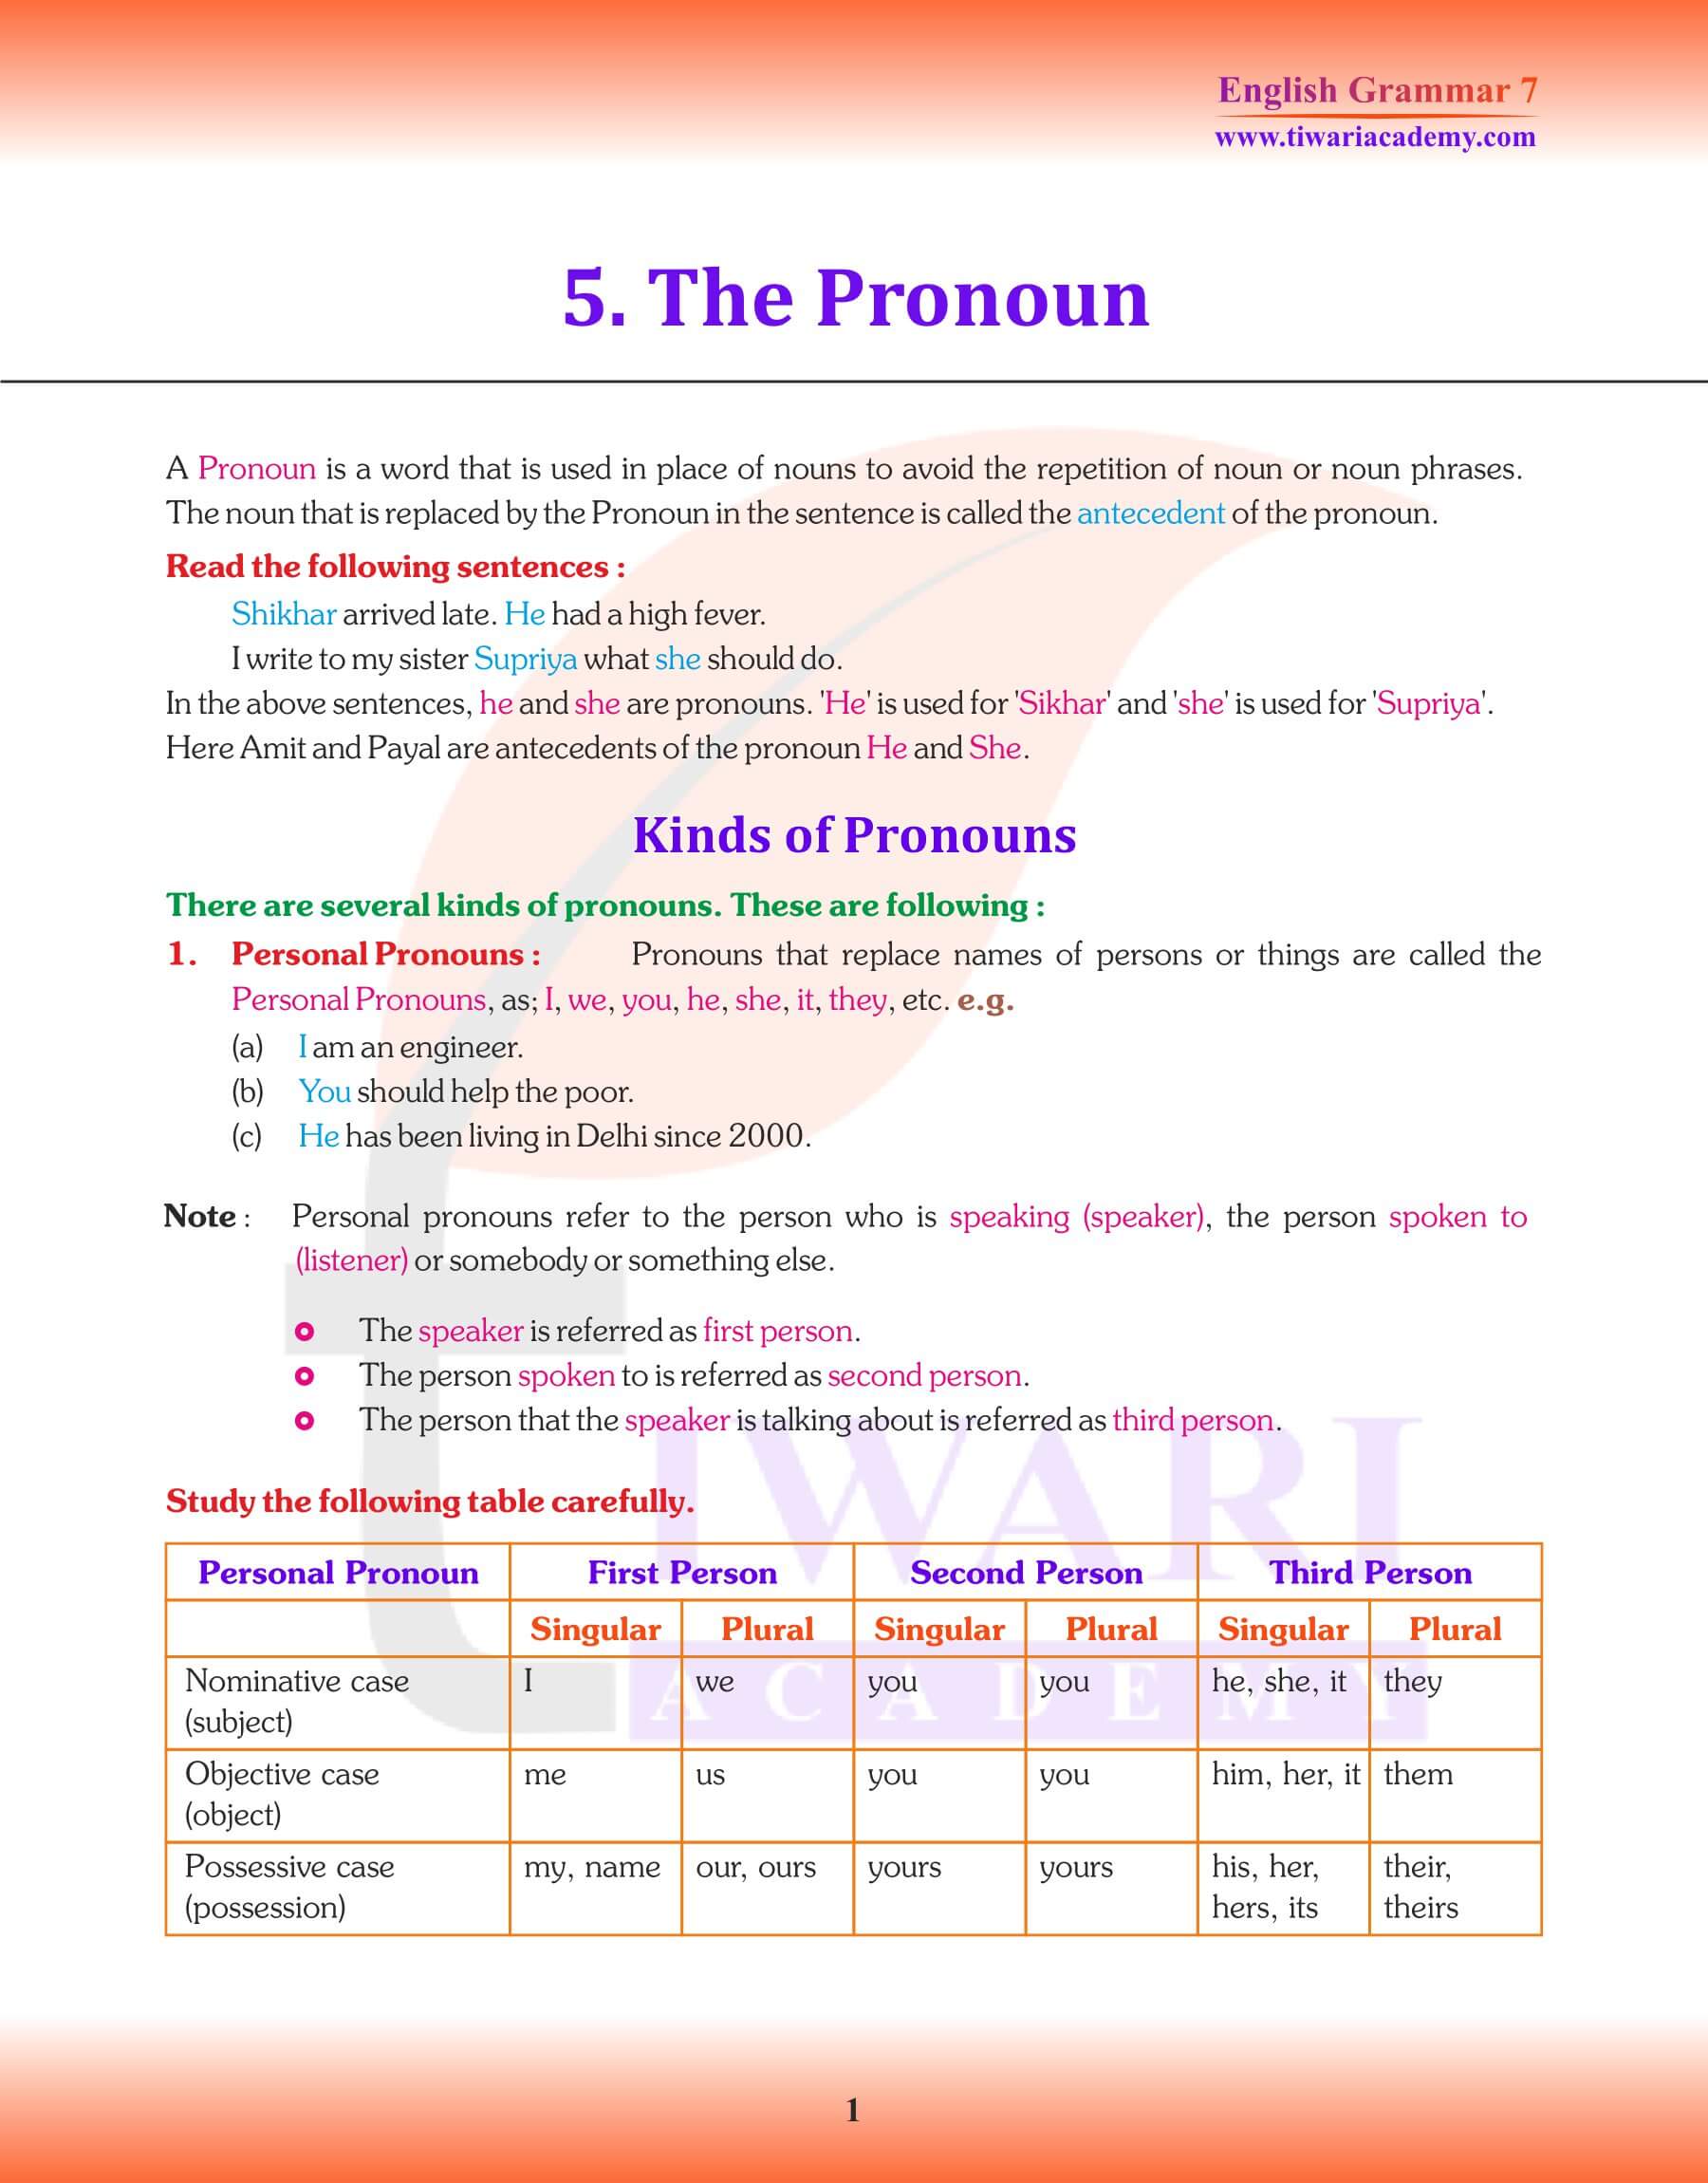 Class 7 English Grammar Chapter 5 Revision book